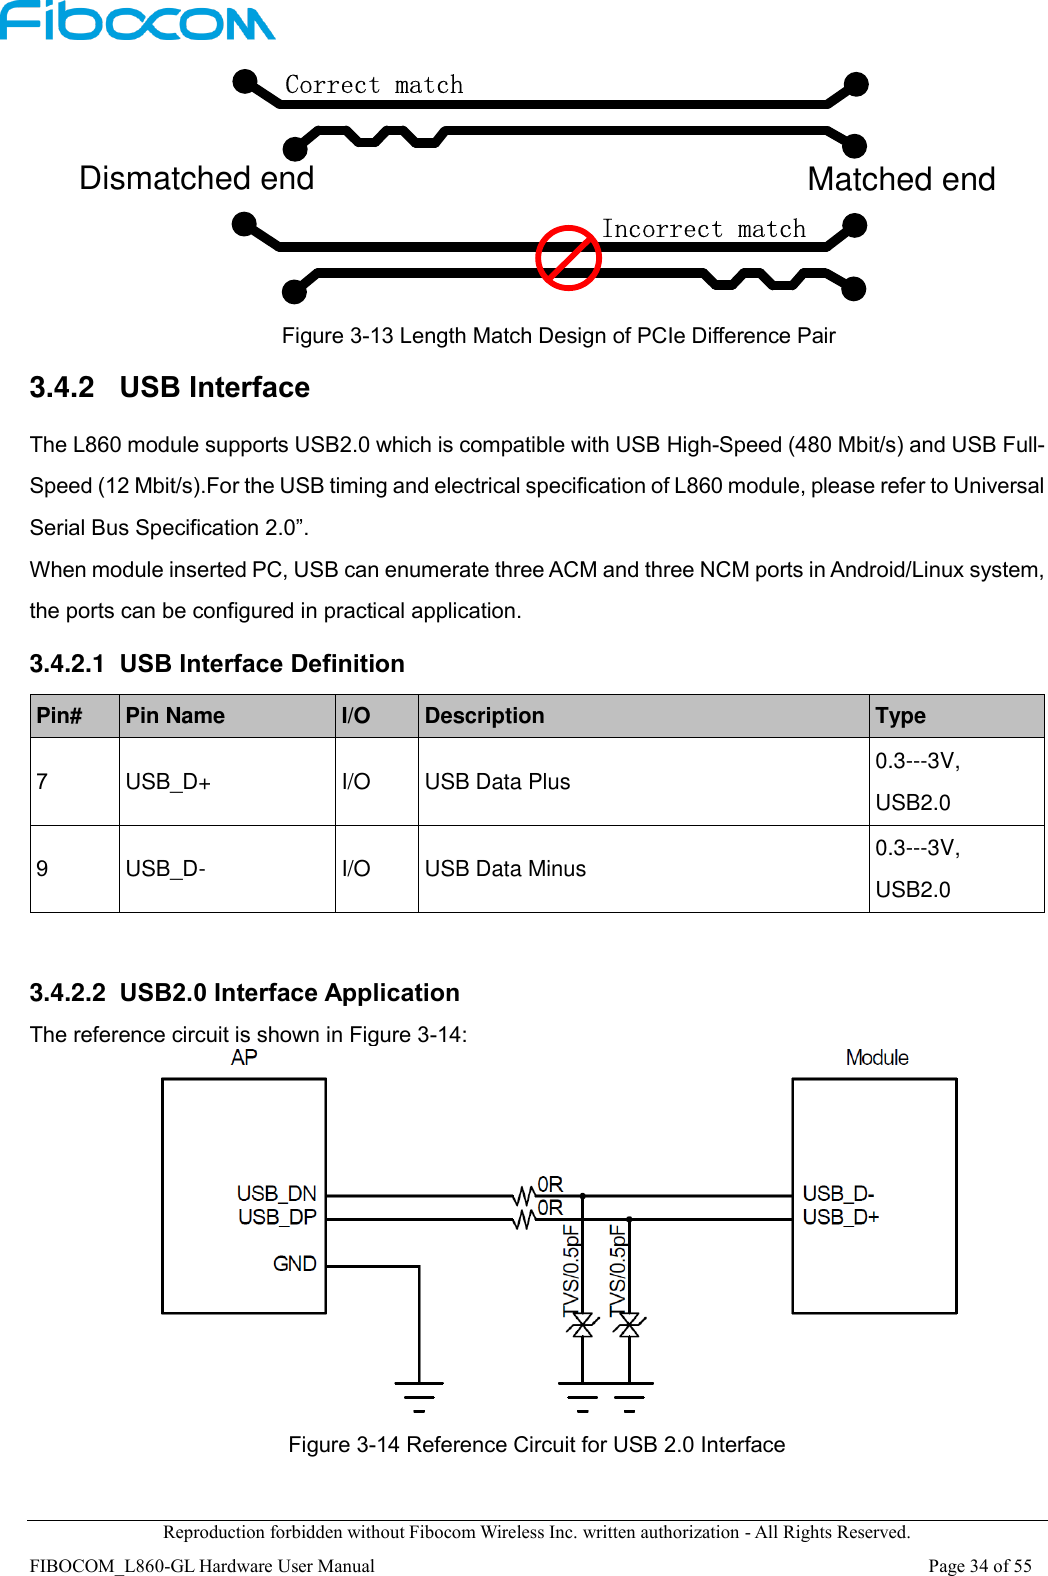  Reproduction forbidden without Fibocom Wireless Inc. written authorization - All Rights Reserved. FIBOCOM_L860-GL Hardware User Manual                                                                                                                      Page 34 of 55 Correct matchDismatched endIncorrect matchMatched end Figure 3-13 Length Match Design of PCIe Difference Pair 3.4.2   USB Interface The L860 module supports USB2.0 which is compatible with USB High-Speed (480 Mbit/s) and USB Full-Speed (12 Mbit/s).For the USB timing and electrical specification of L860 module, please refer to Universal Serial Bus Specification 2.0”. When module inserted PC, USB can enumerate three ACM and three NCM ports in Android/Linux system, the ports can be configured in practical application. 3.4.2.1  USB Interface Definition Pin# Pin Name I/O Description Type 7 USB_D+ I/O USB Data Plus 0.3---3V,   USB2.0 9 USB_D- I/O USB Data Minus 0.3---3V,   USB2.0  3.4.2.2  USB2.0 Interface Application The reference circuit is shown in Figure 3-14:    Figure 3-14 Reference Circuit for USB 2.0 Interface  